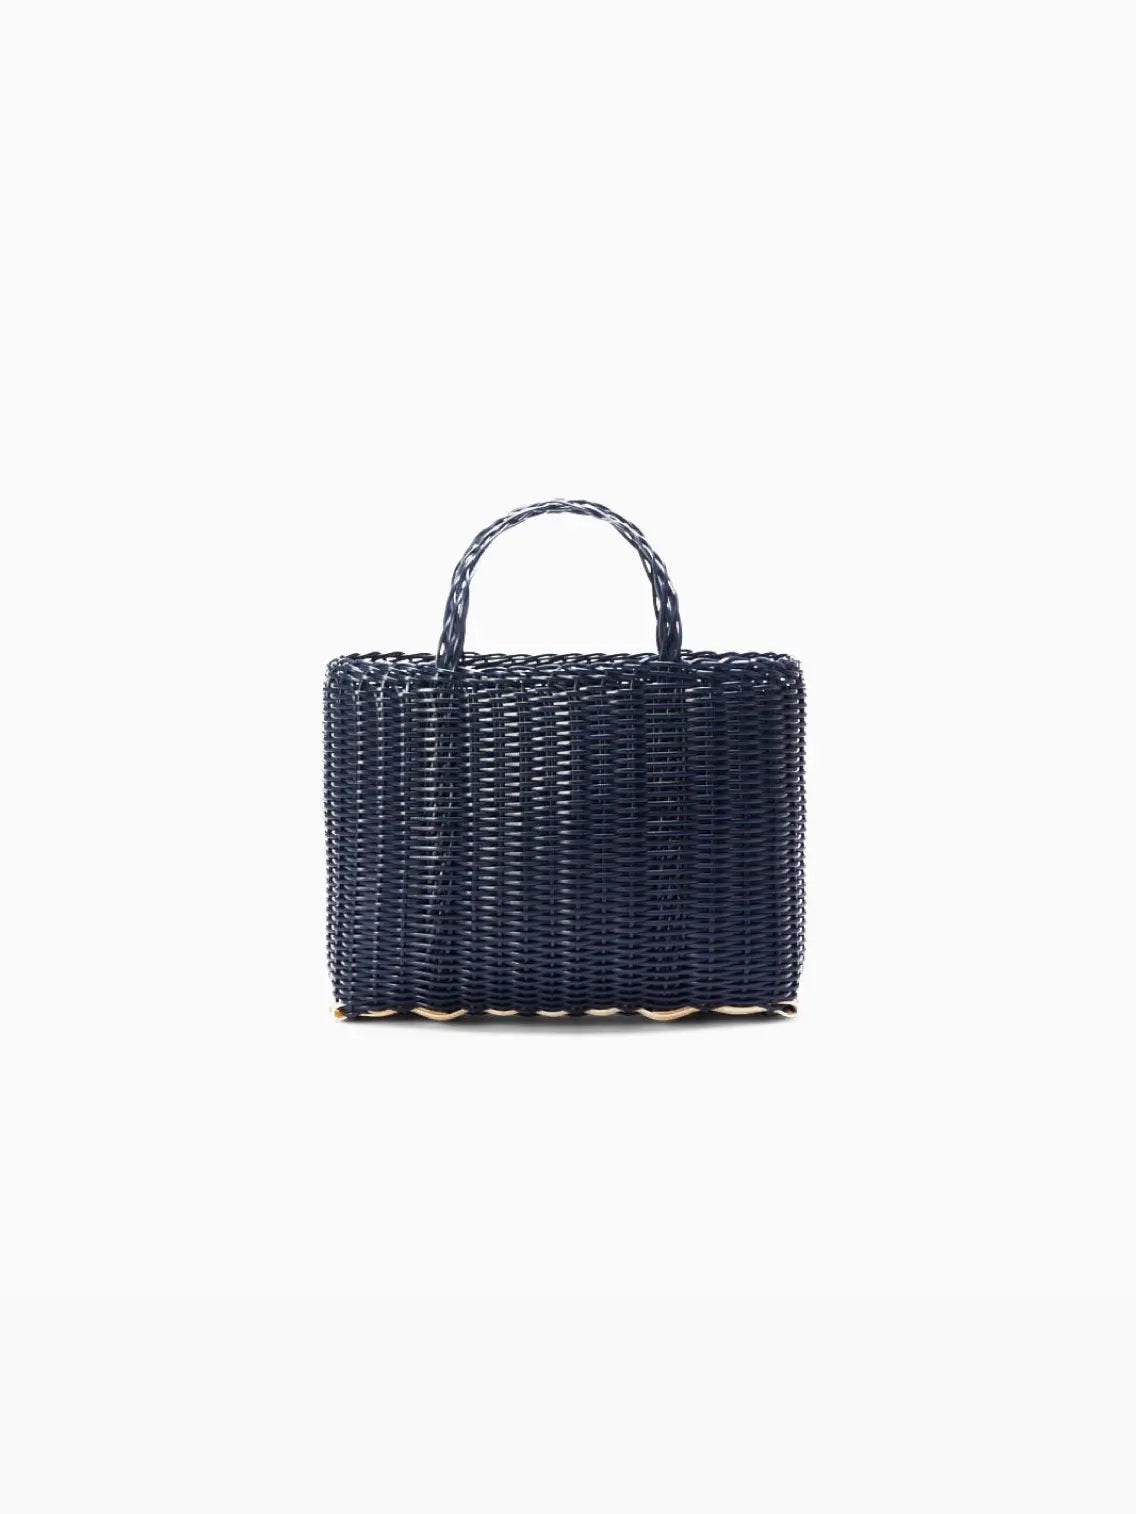 A woven navy blue handbag with a rectangular shape, available exclusively at Bassalstore in Barcelona. It features a single, short woven handle on top. The bag has a neat, uniform weave pattern and a solid structure, resting on a white background. Introducing the **Palorosa Mini Tote Midnight Bag**.